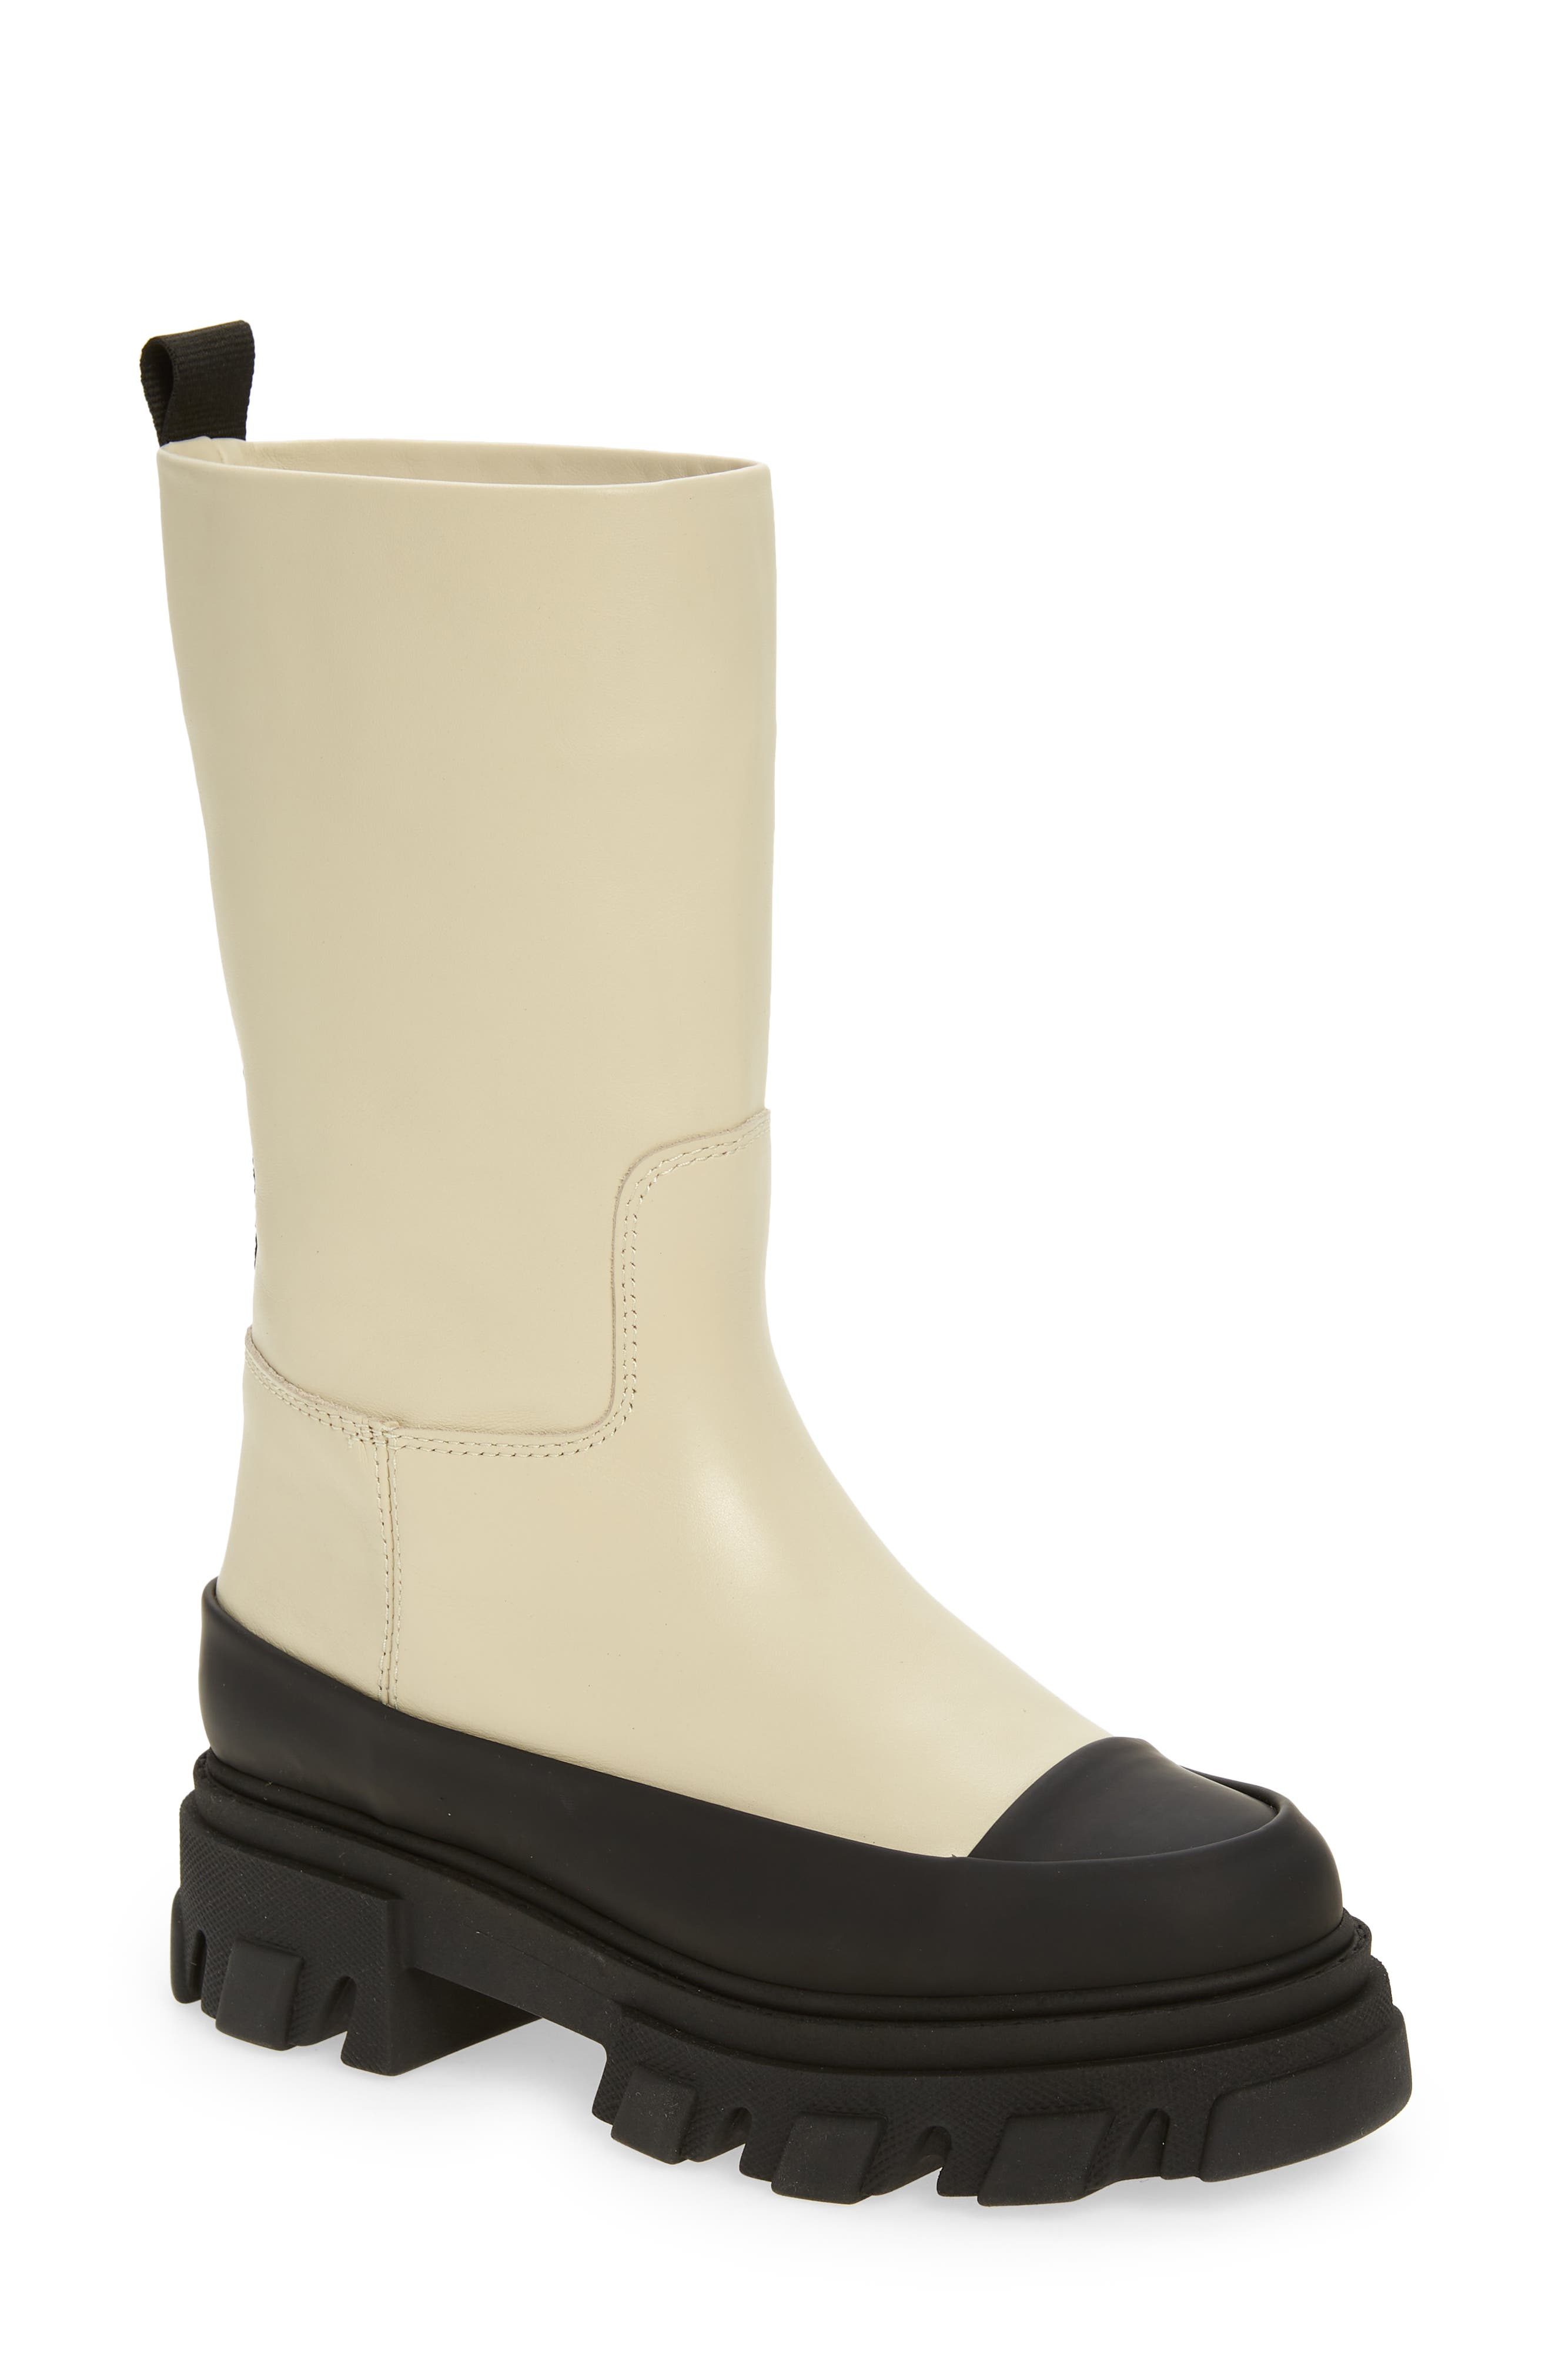 Ganni Tubular Boot in Oyster Gray at Nordstrom, Size 11Us